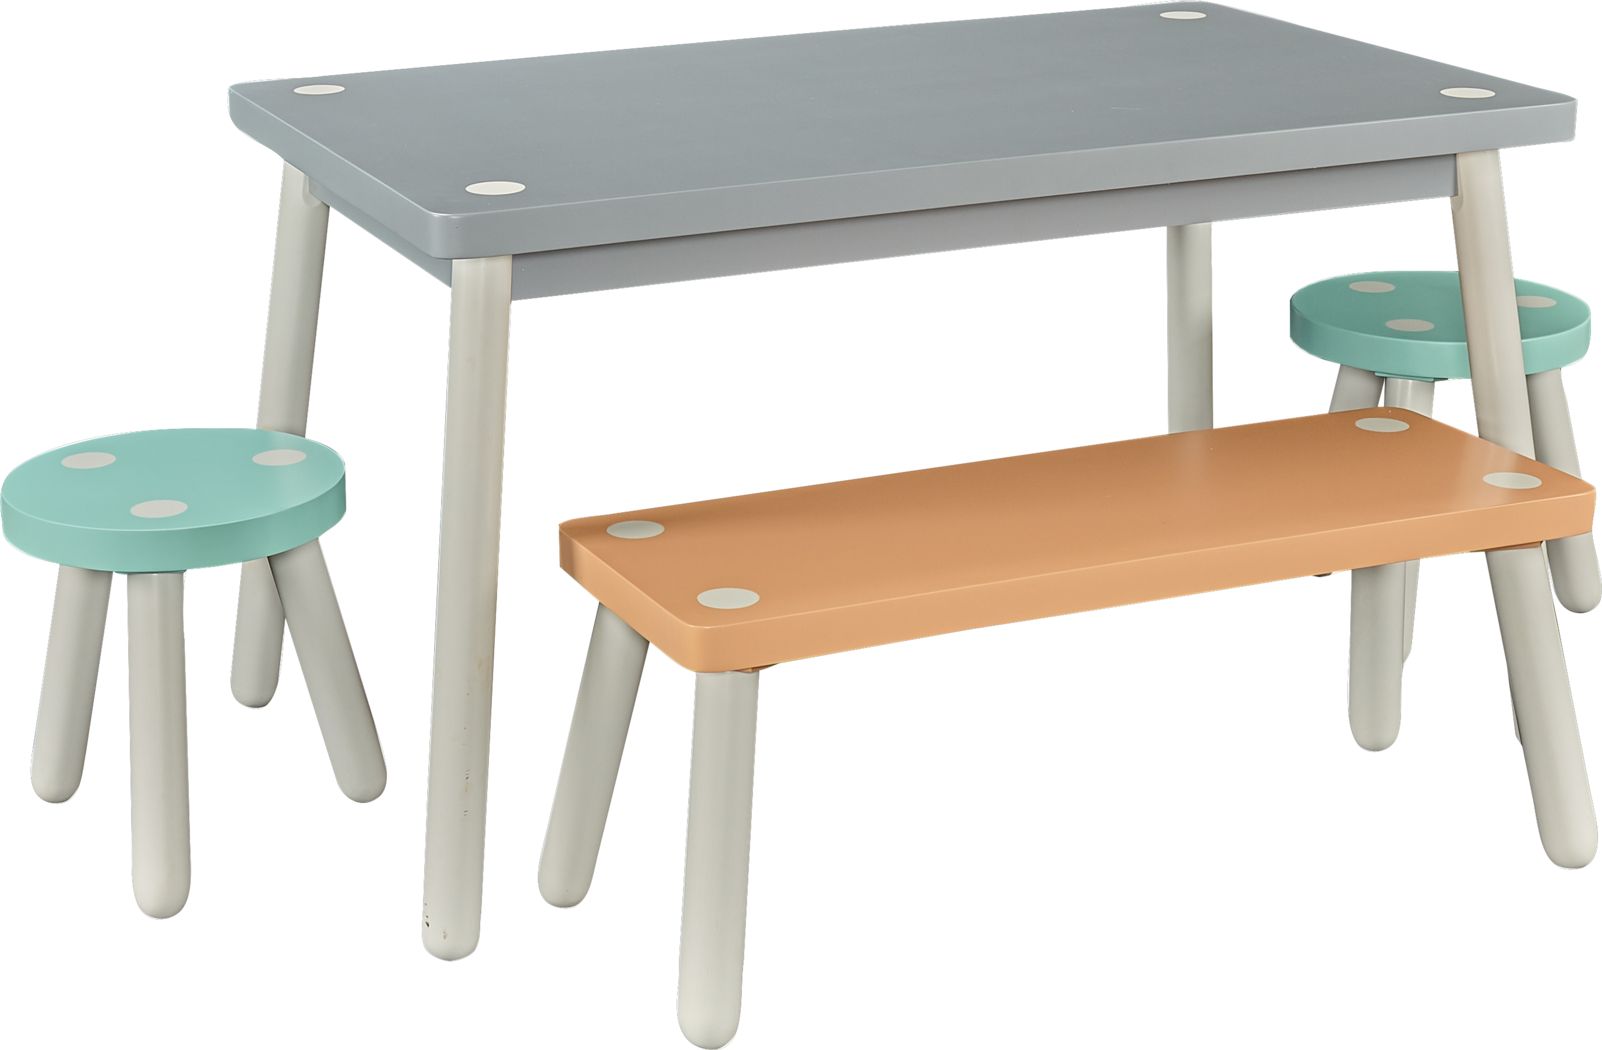 table n chairs for kids